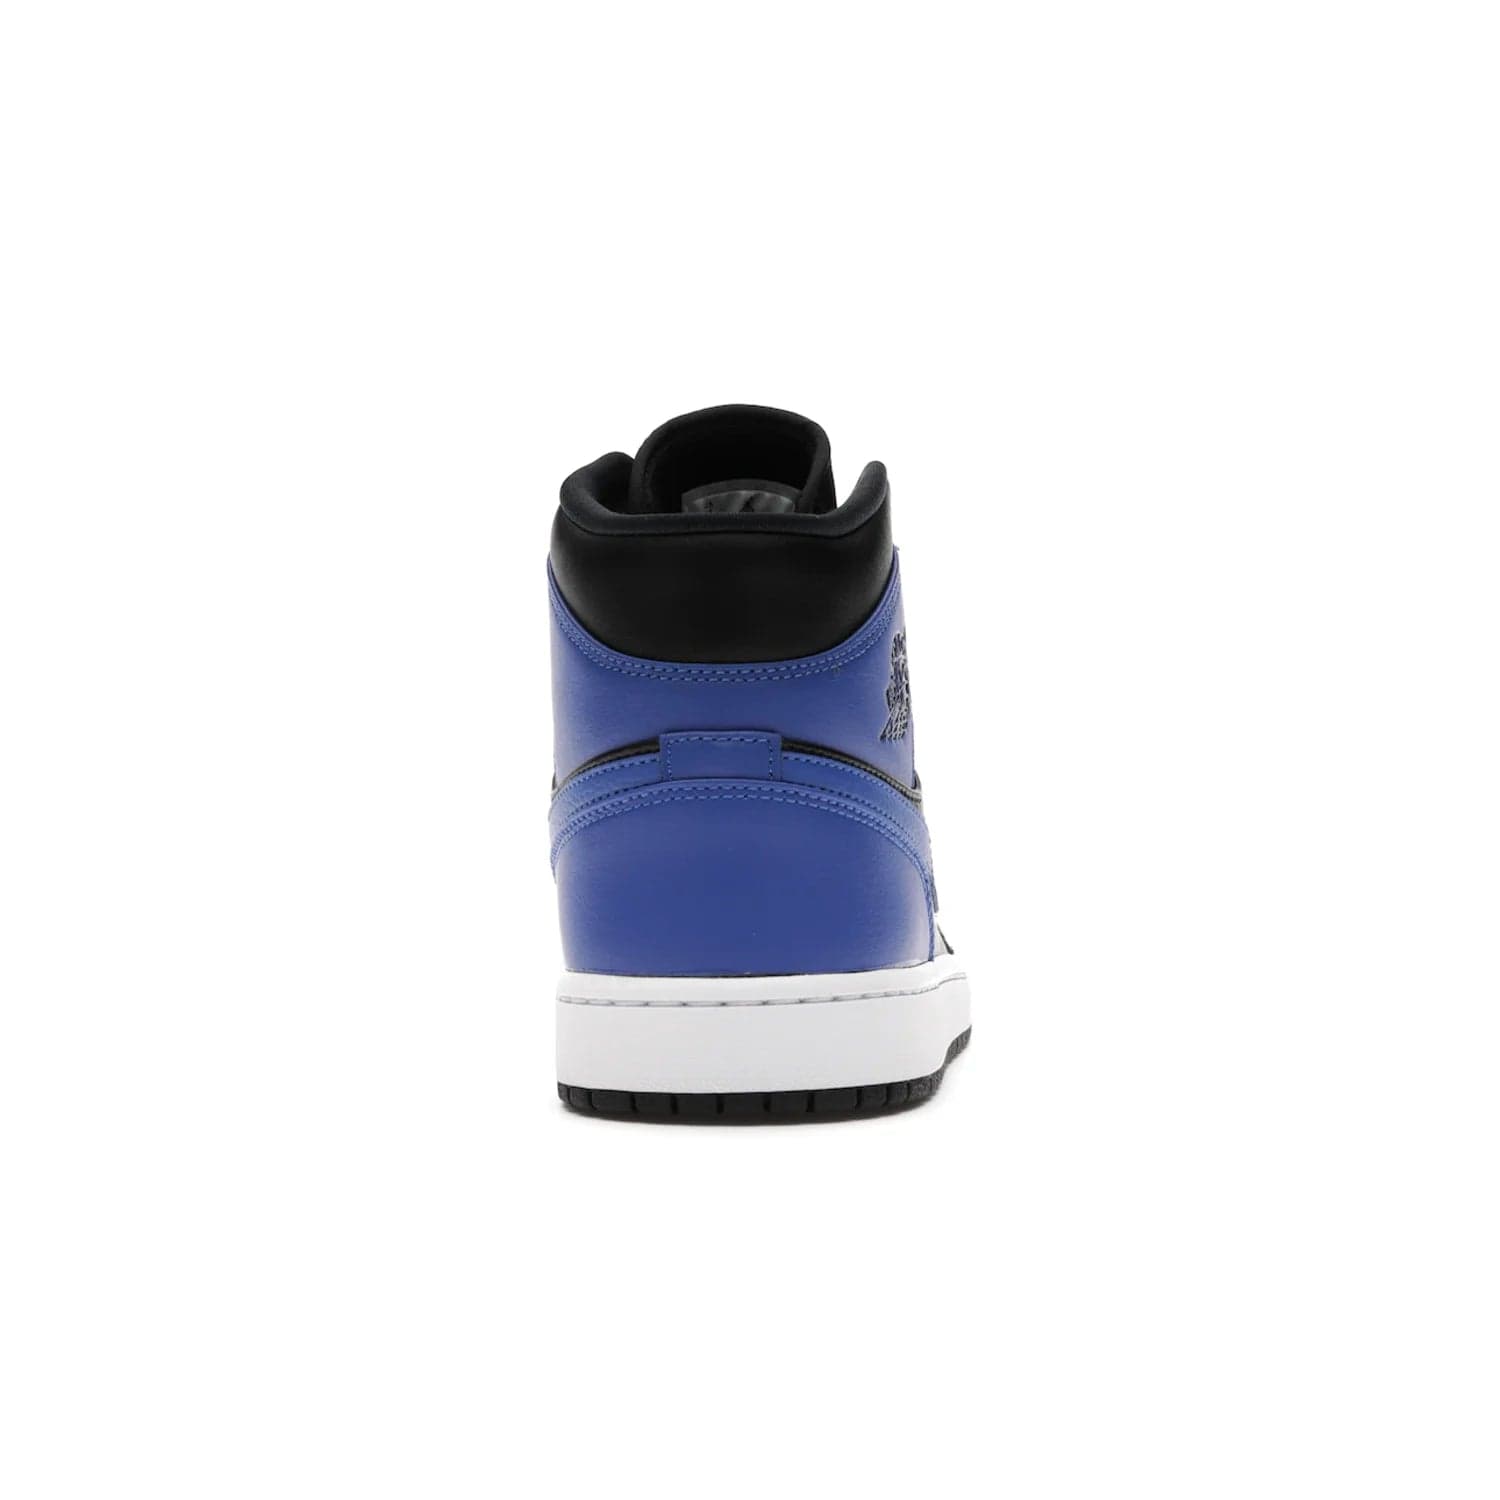 Jordan 1 Mid Hyper Royal Tumbled Leather - Image 28 - Only at www.BallersClubKickz.com - Iconic colorway of the Air Jordan 1 Mid Black Royal Tumbled Leather. Features a black tumbled leather upper, royal blue leather overlays, white midsole & black rubber outsole. Released December 2020. Adds premium style to any collection.